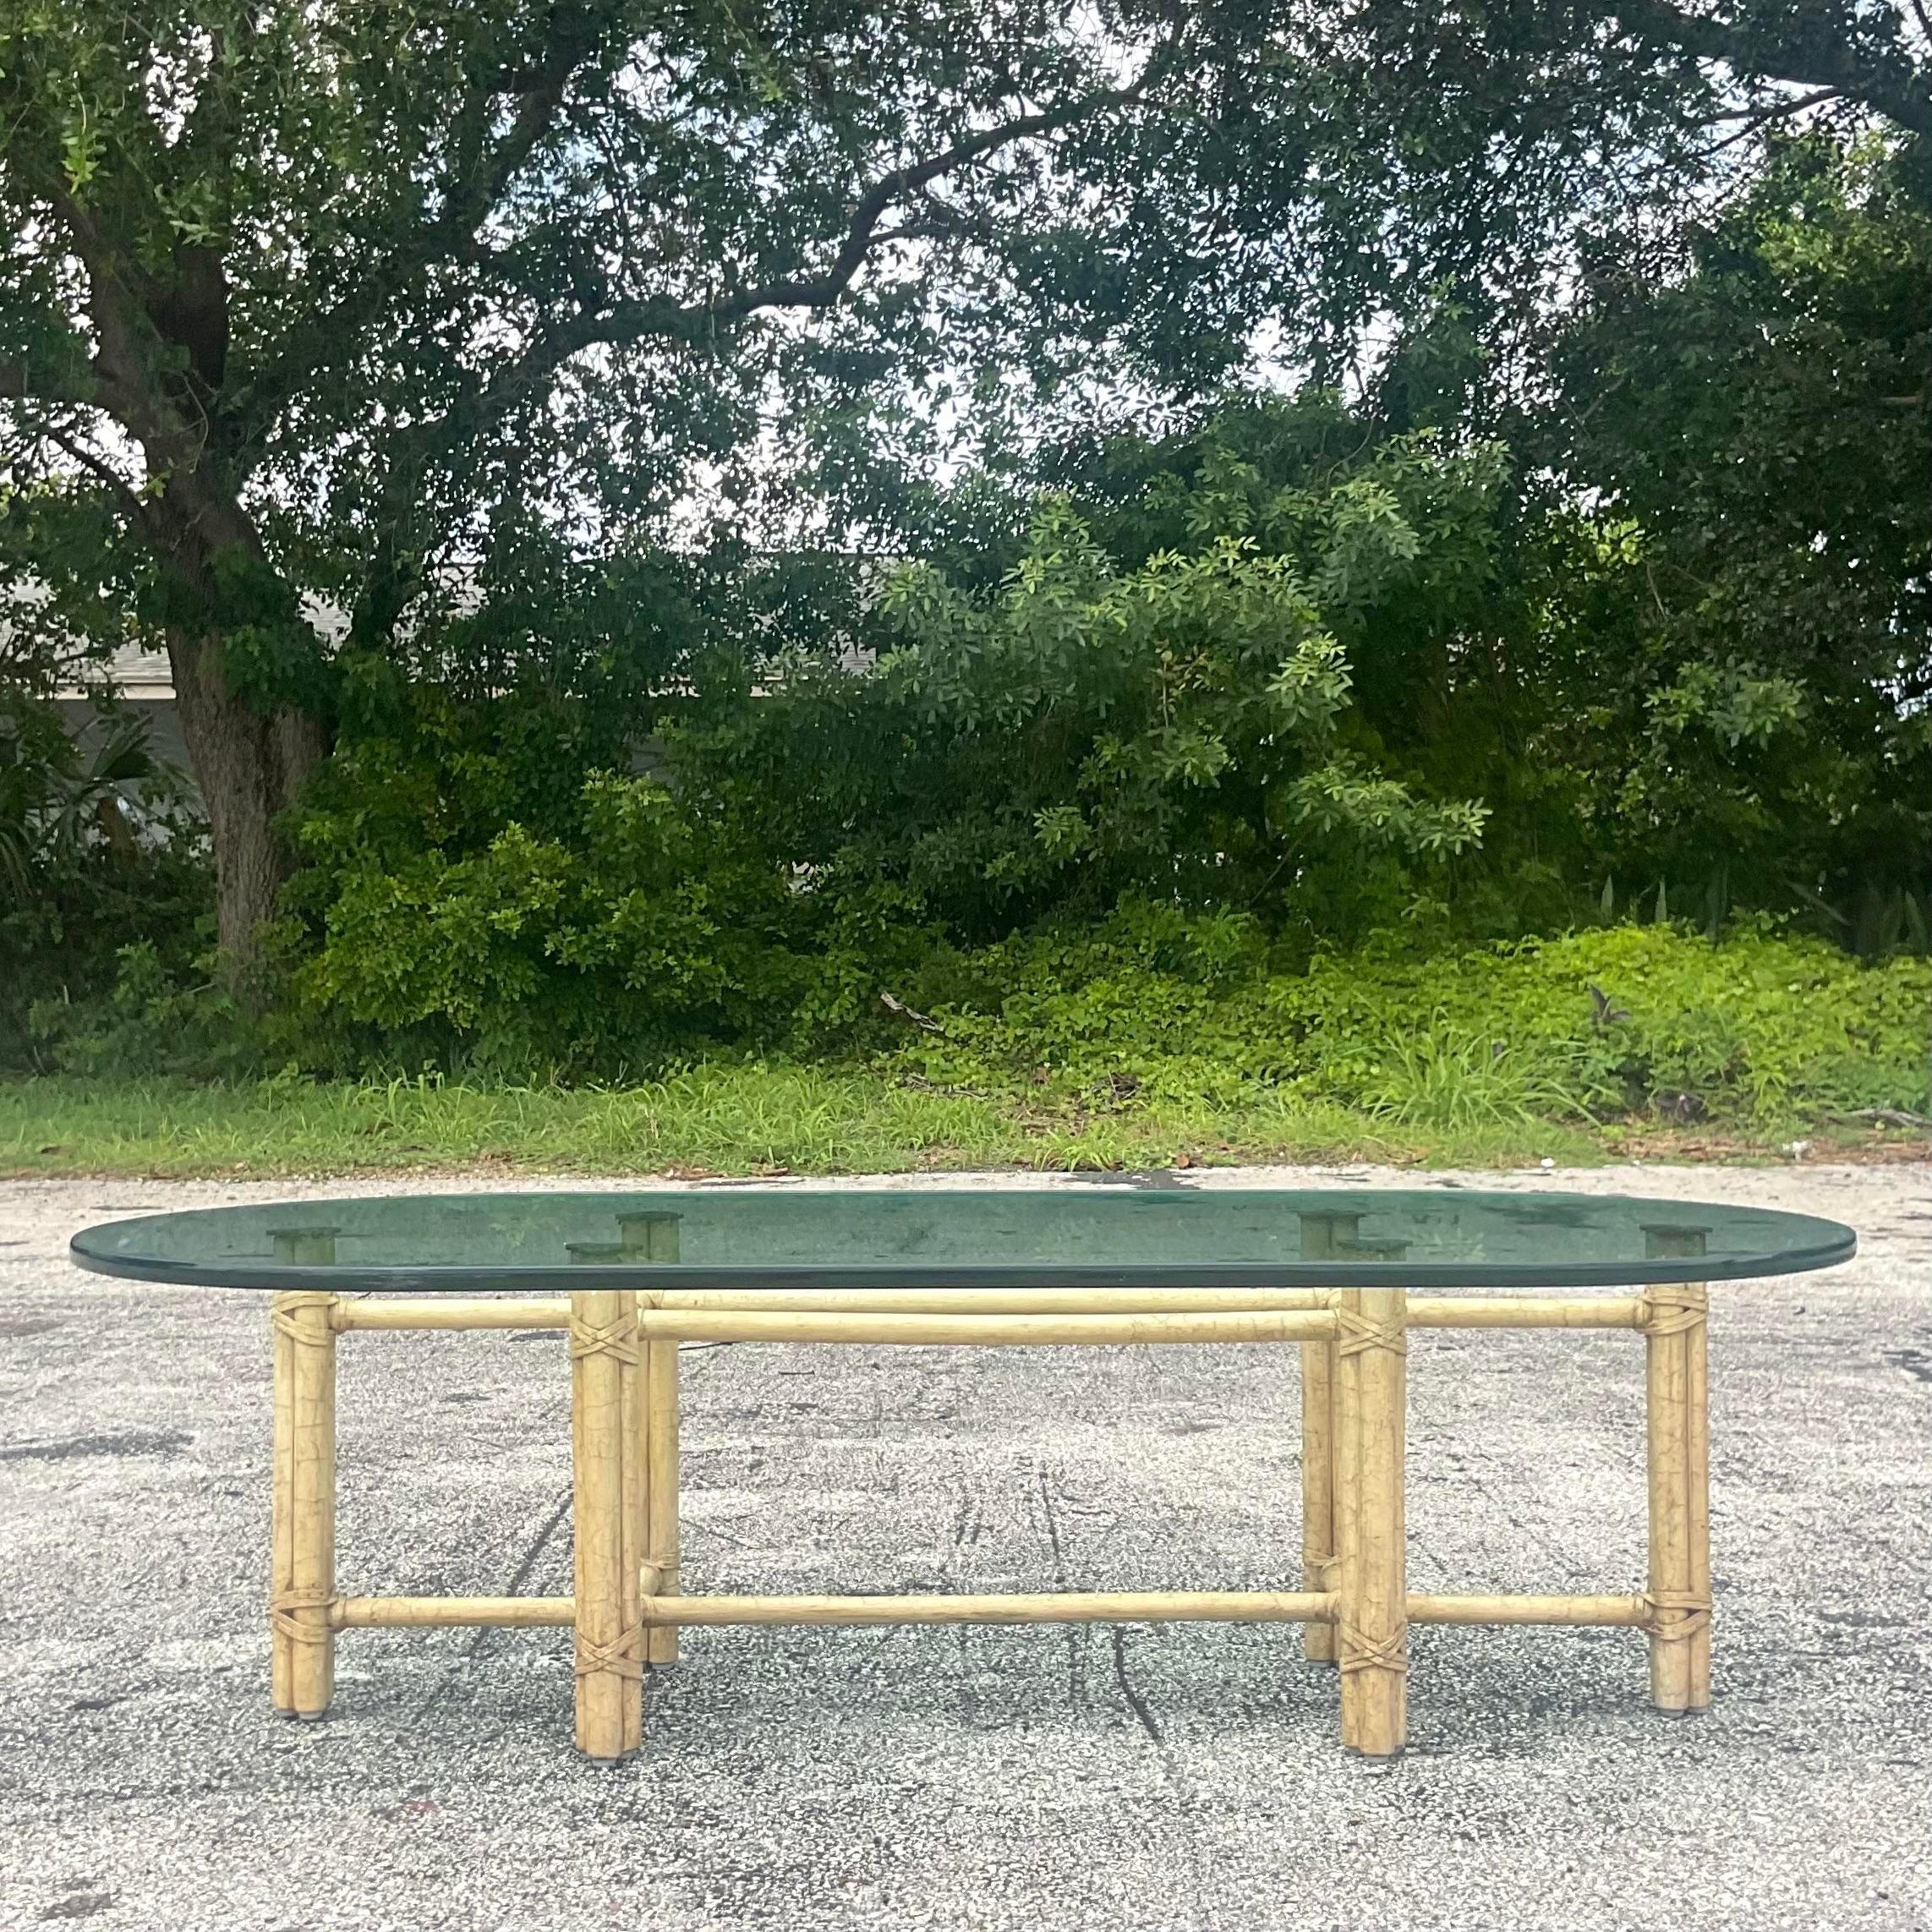 A fabulous vintage Coastal coffee table. Made by the iconic McGuire group and tagged on the bottom. Classic McGuire rattan shape with a thick glass top. Acquired from a Palm Beach estate. 